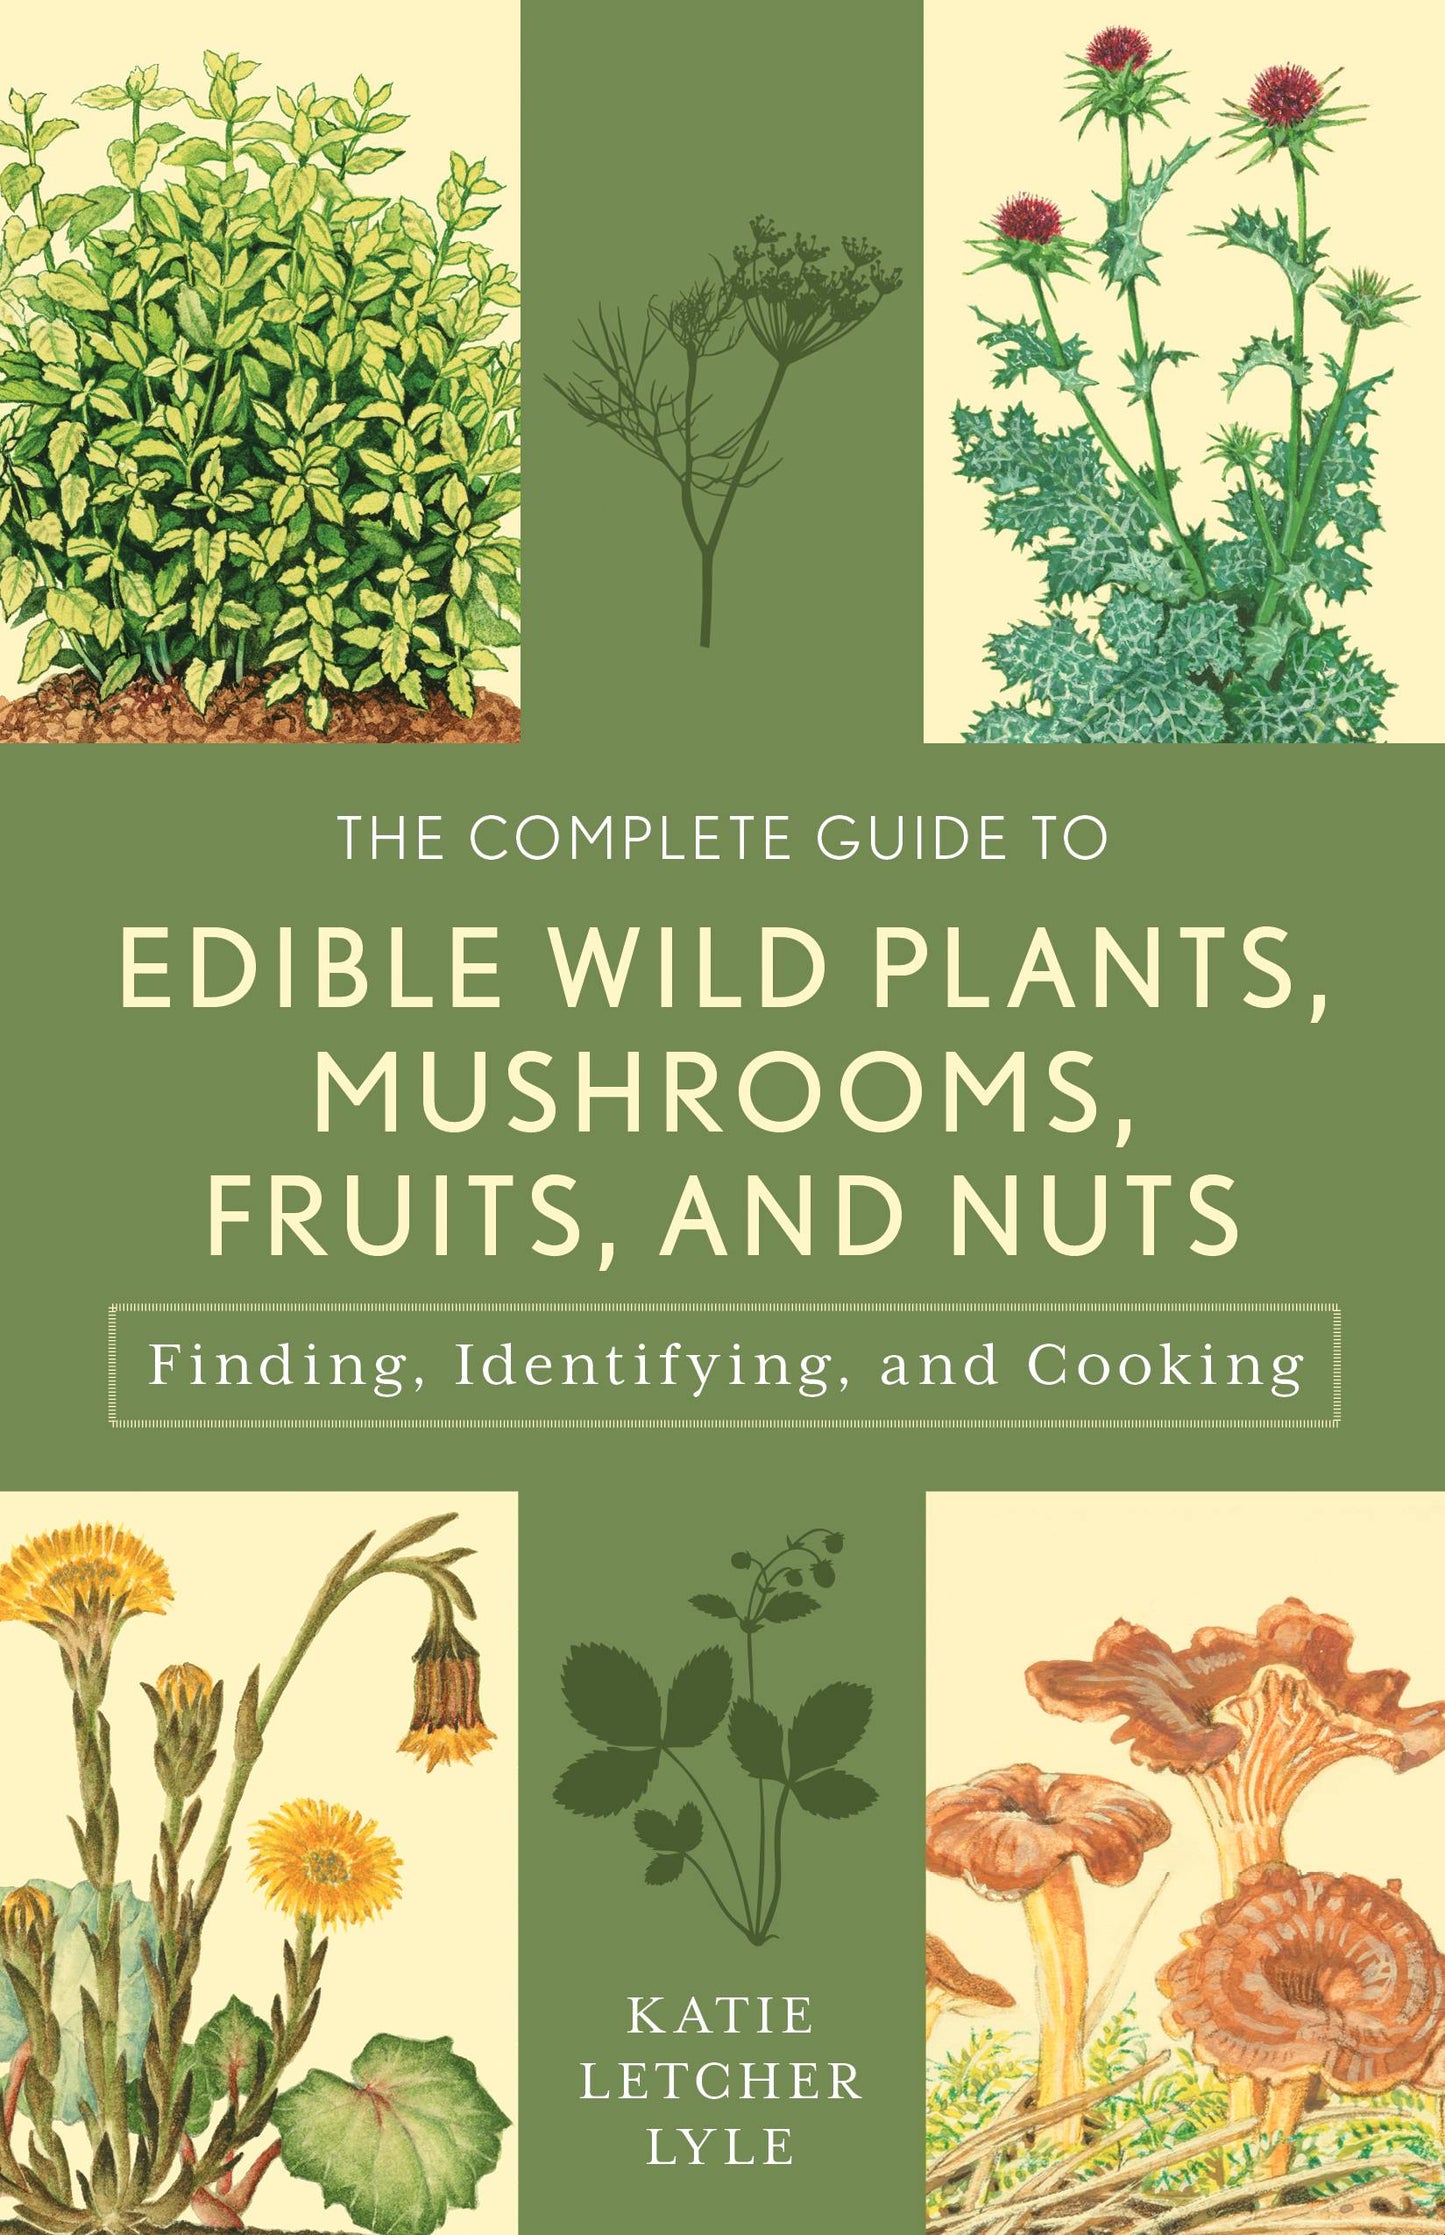 THE COMPLETE GUIDE TO EDIBLE WILD PLANTS, MUSHROOMS, FRUITS, AND NUTS